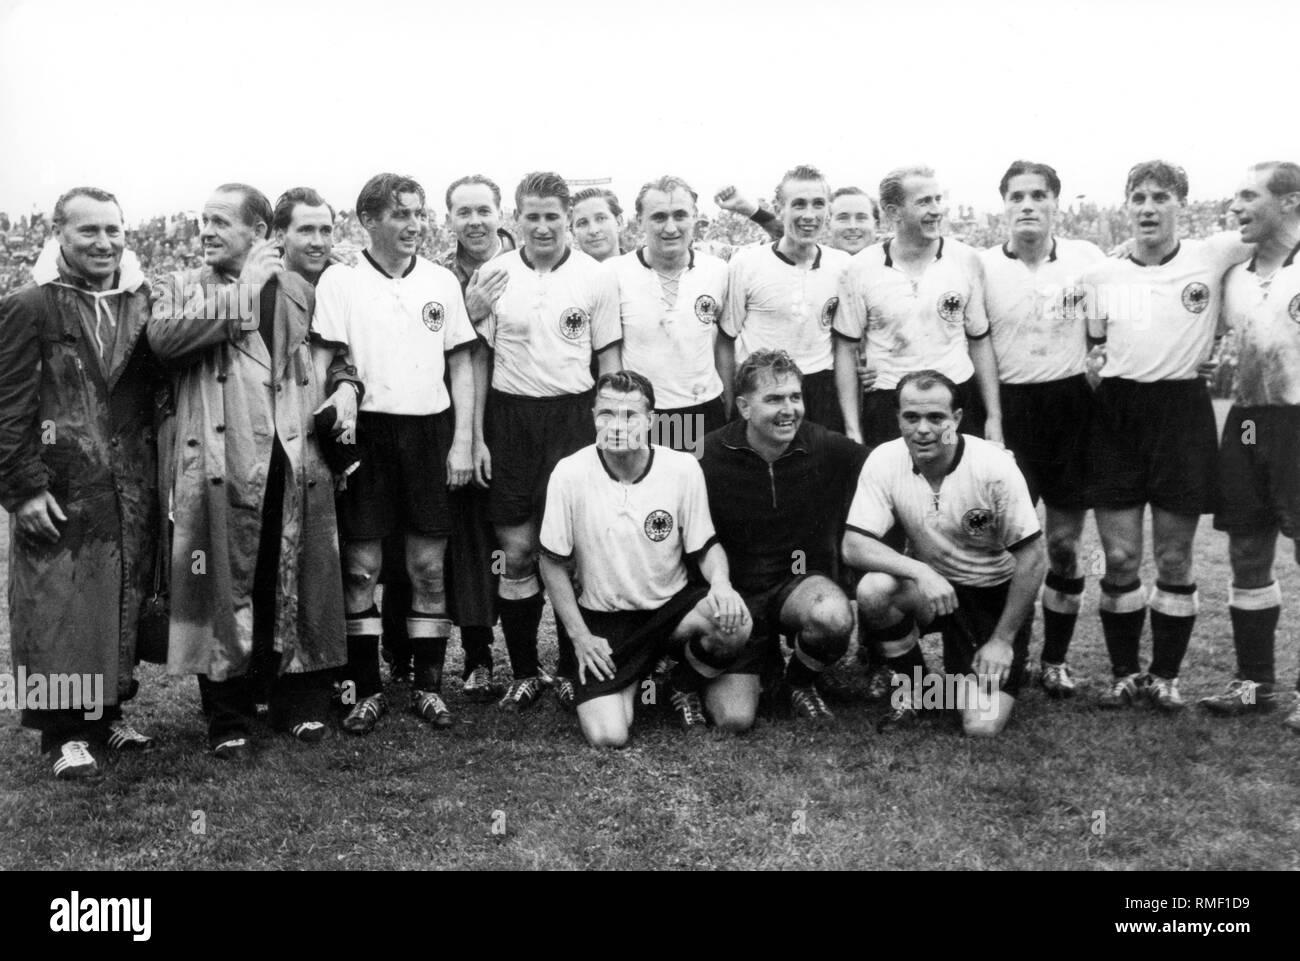 Germany is Football World Champion: At the 1954 International Football World Cup in Bern, the German national team won against Hungary with 3-2. The 'Heroes of Bern' from left: Adidas boss Adi Dassler, national coach Sepp Herberger, team captain Fritz Walter, Helmut Rahn, Josef Posipal, Horst Eckel, Werner Liebrich, Ottmar Walter, Winfried Schaefer, Max Morlock, kneeling from left: Karl Mai , Toni Turek and Werner Kohlmeyer, the only one from the triumph team of 1954, who could not see the 1974 World Cup . Stock Photo